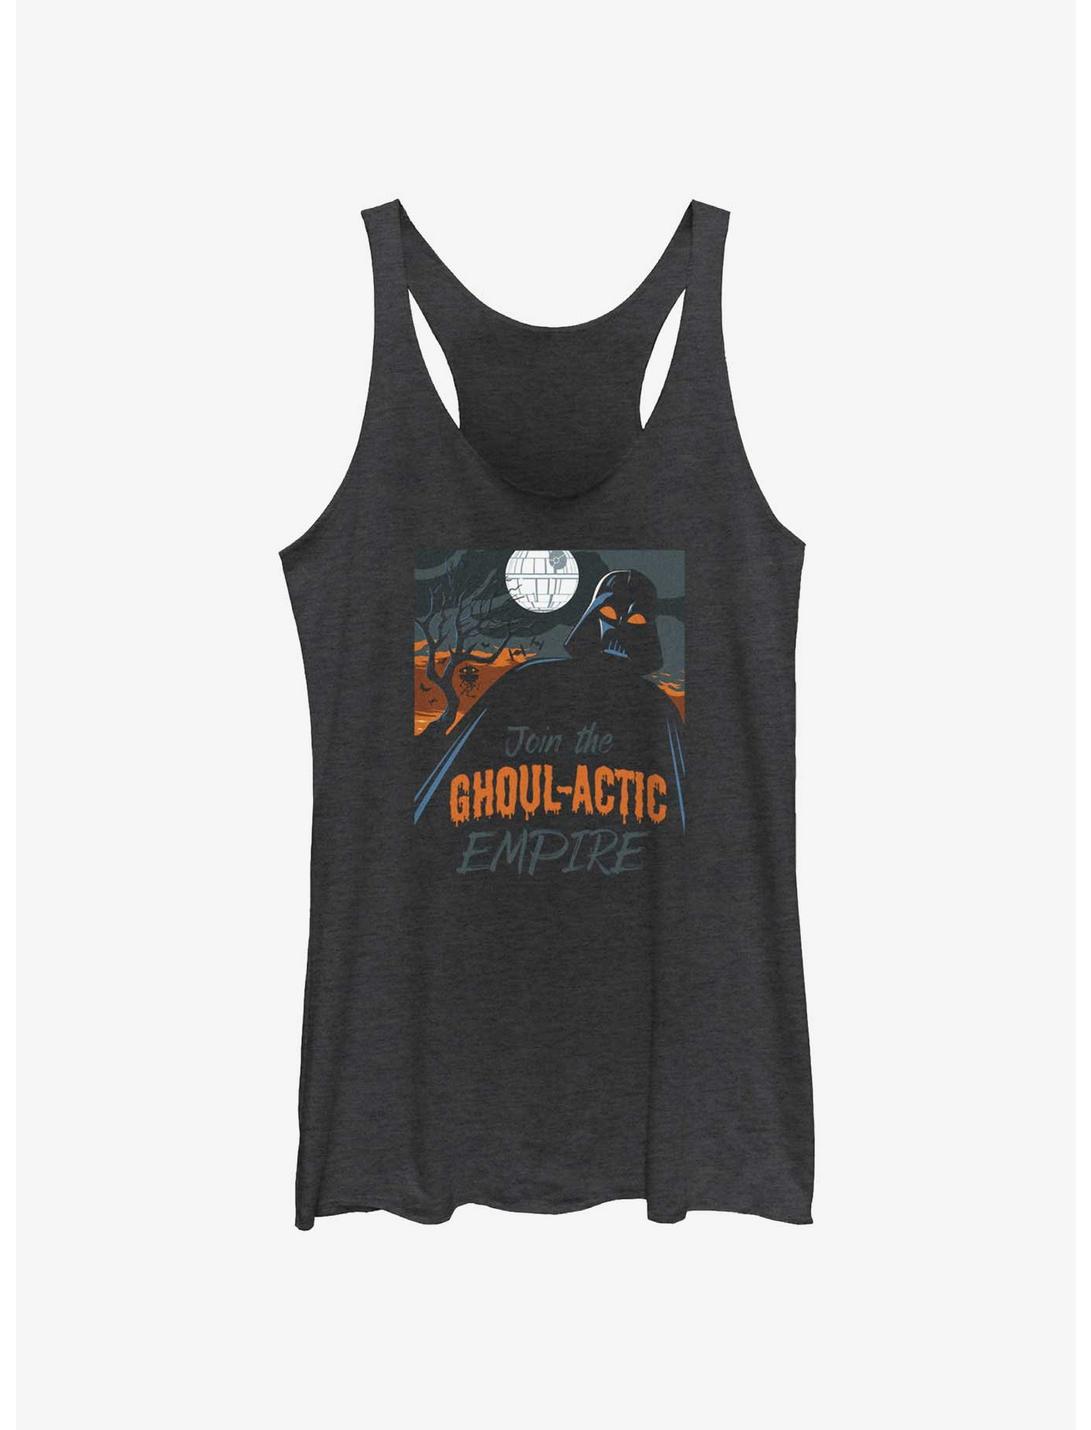 Star Wars Ghoulactic Empire Womens Tank Top, BLK HTR, hi-res